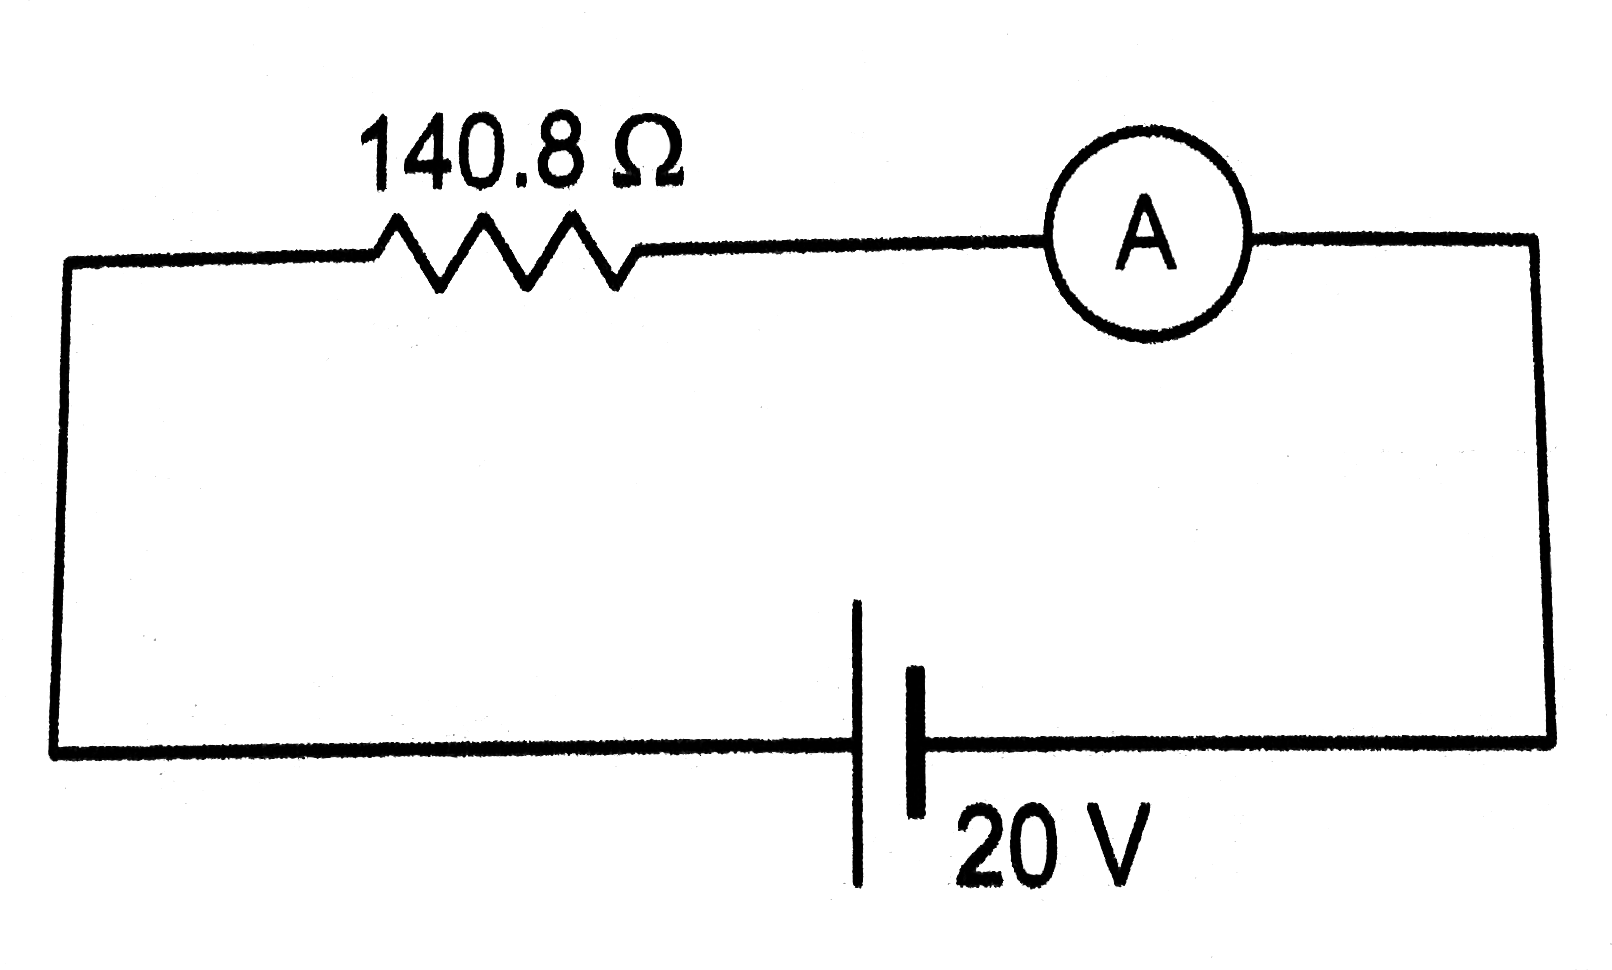 The ammeter shown in figure consists of a 480(omega)coil connected in parallel to a 20 (omega) shunt. Find the reading of the ammeter.